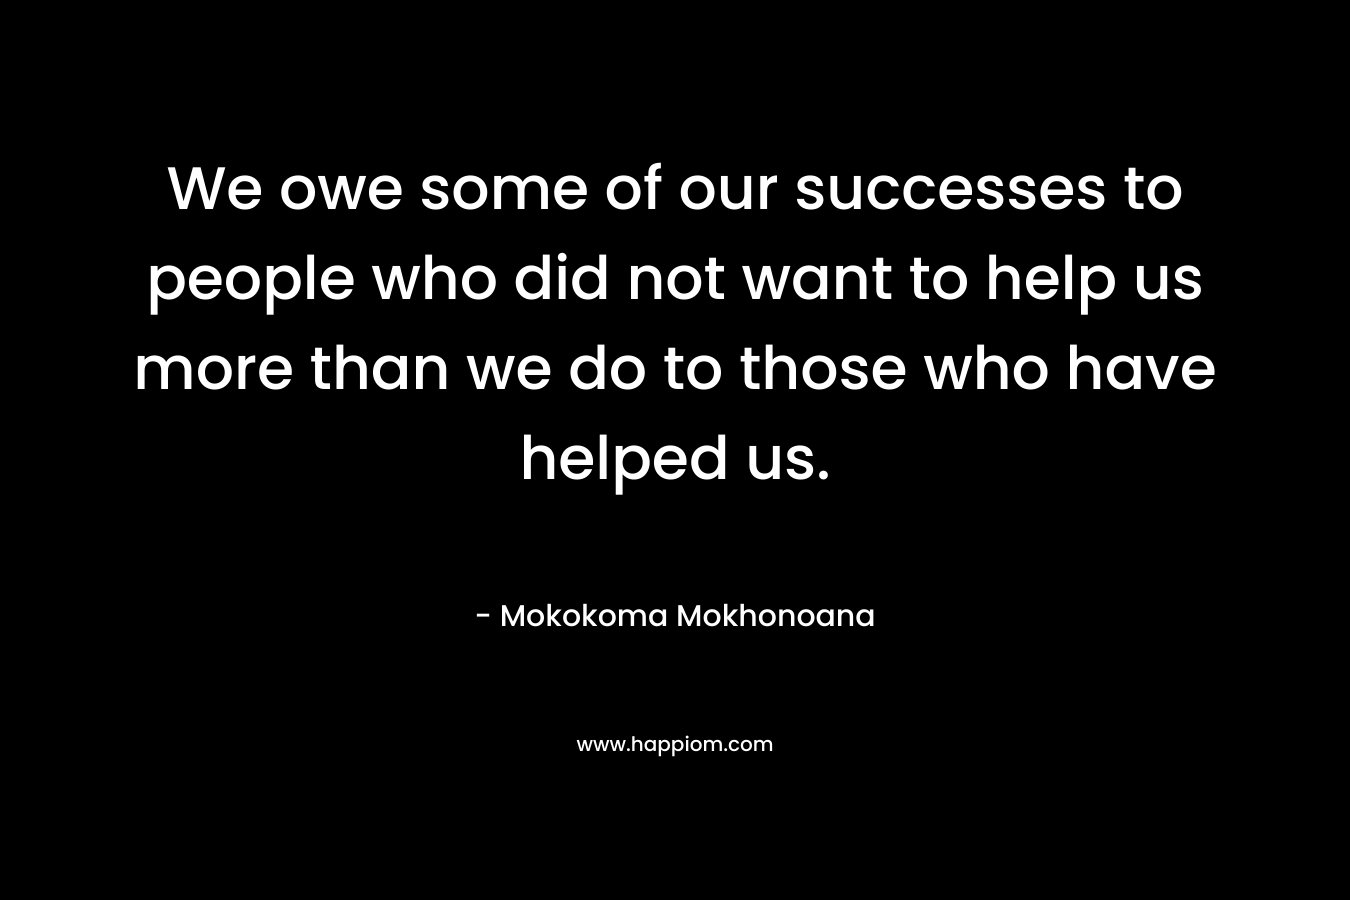 We owe some of our successes to people who did not want to help us more than we do to those who have helped us.